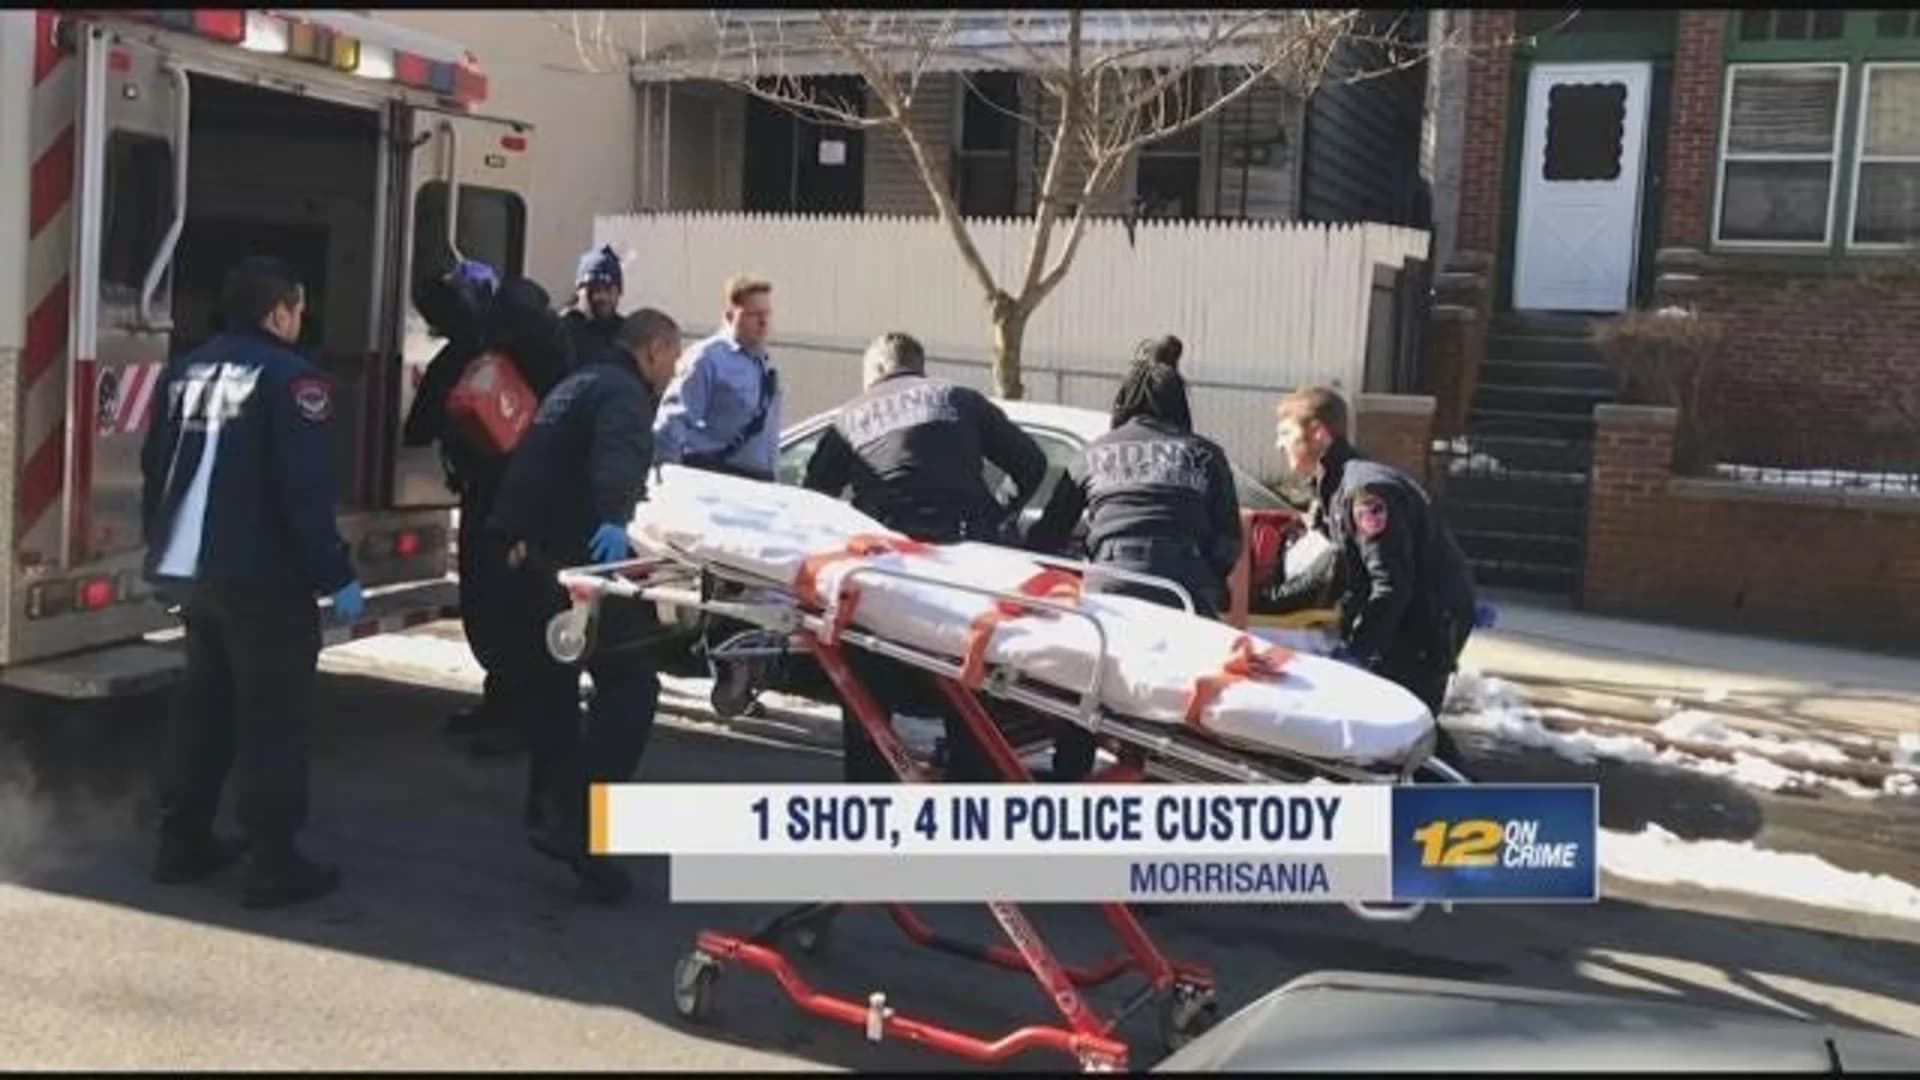 Man shot at Morrisania residence neighbors say doubles as after-hours club